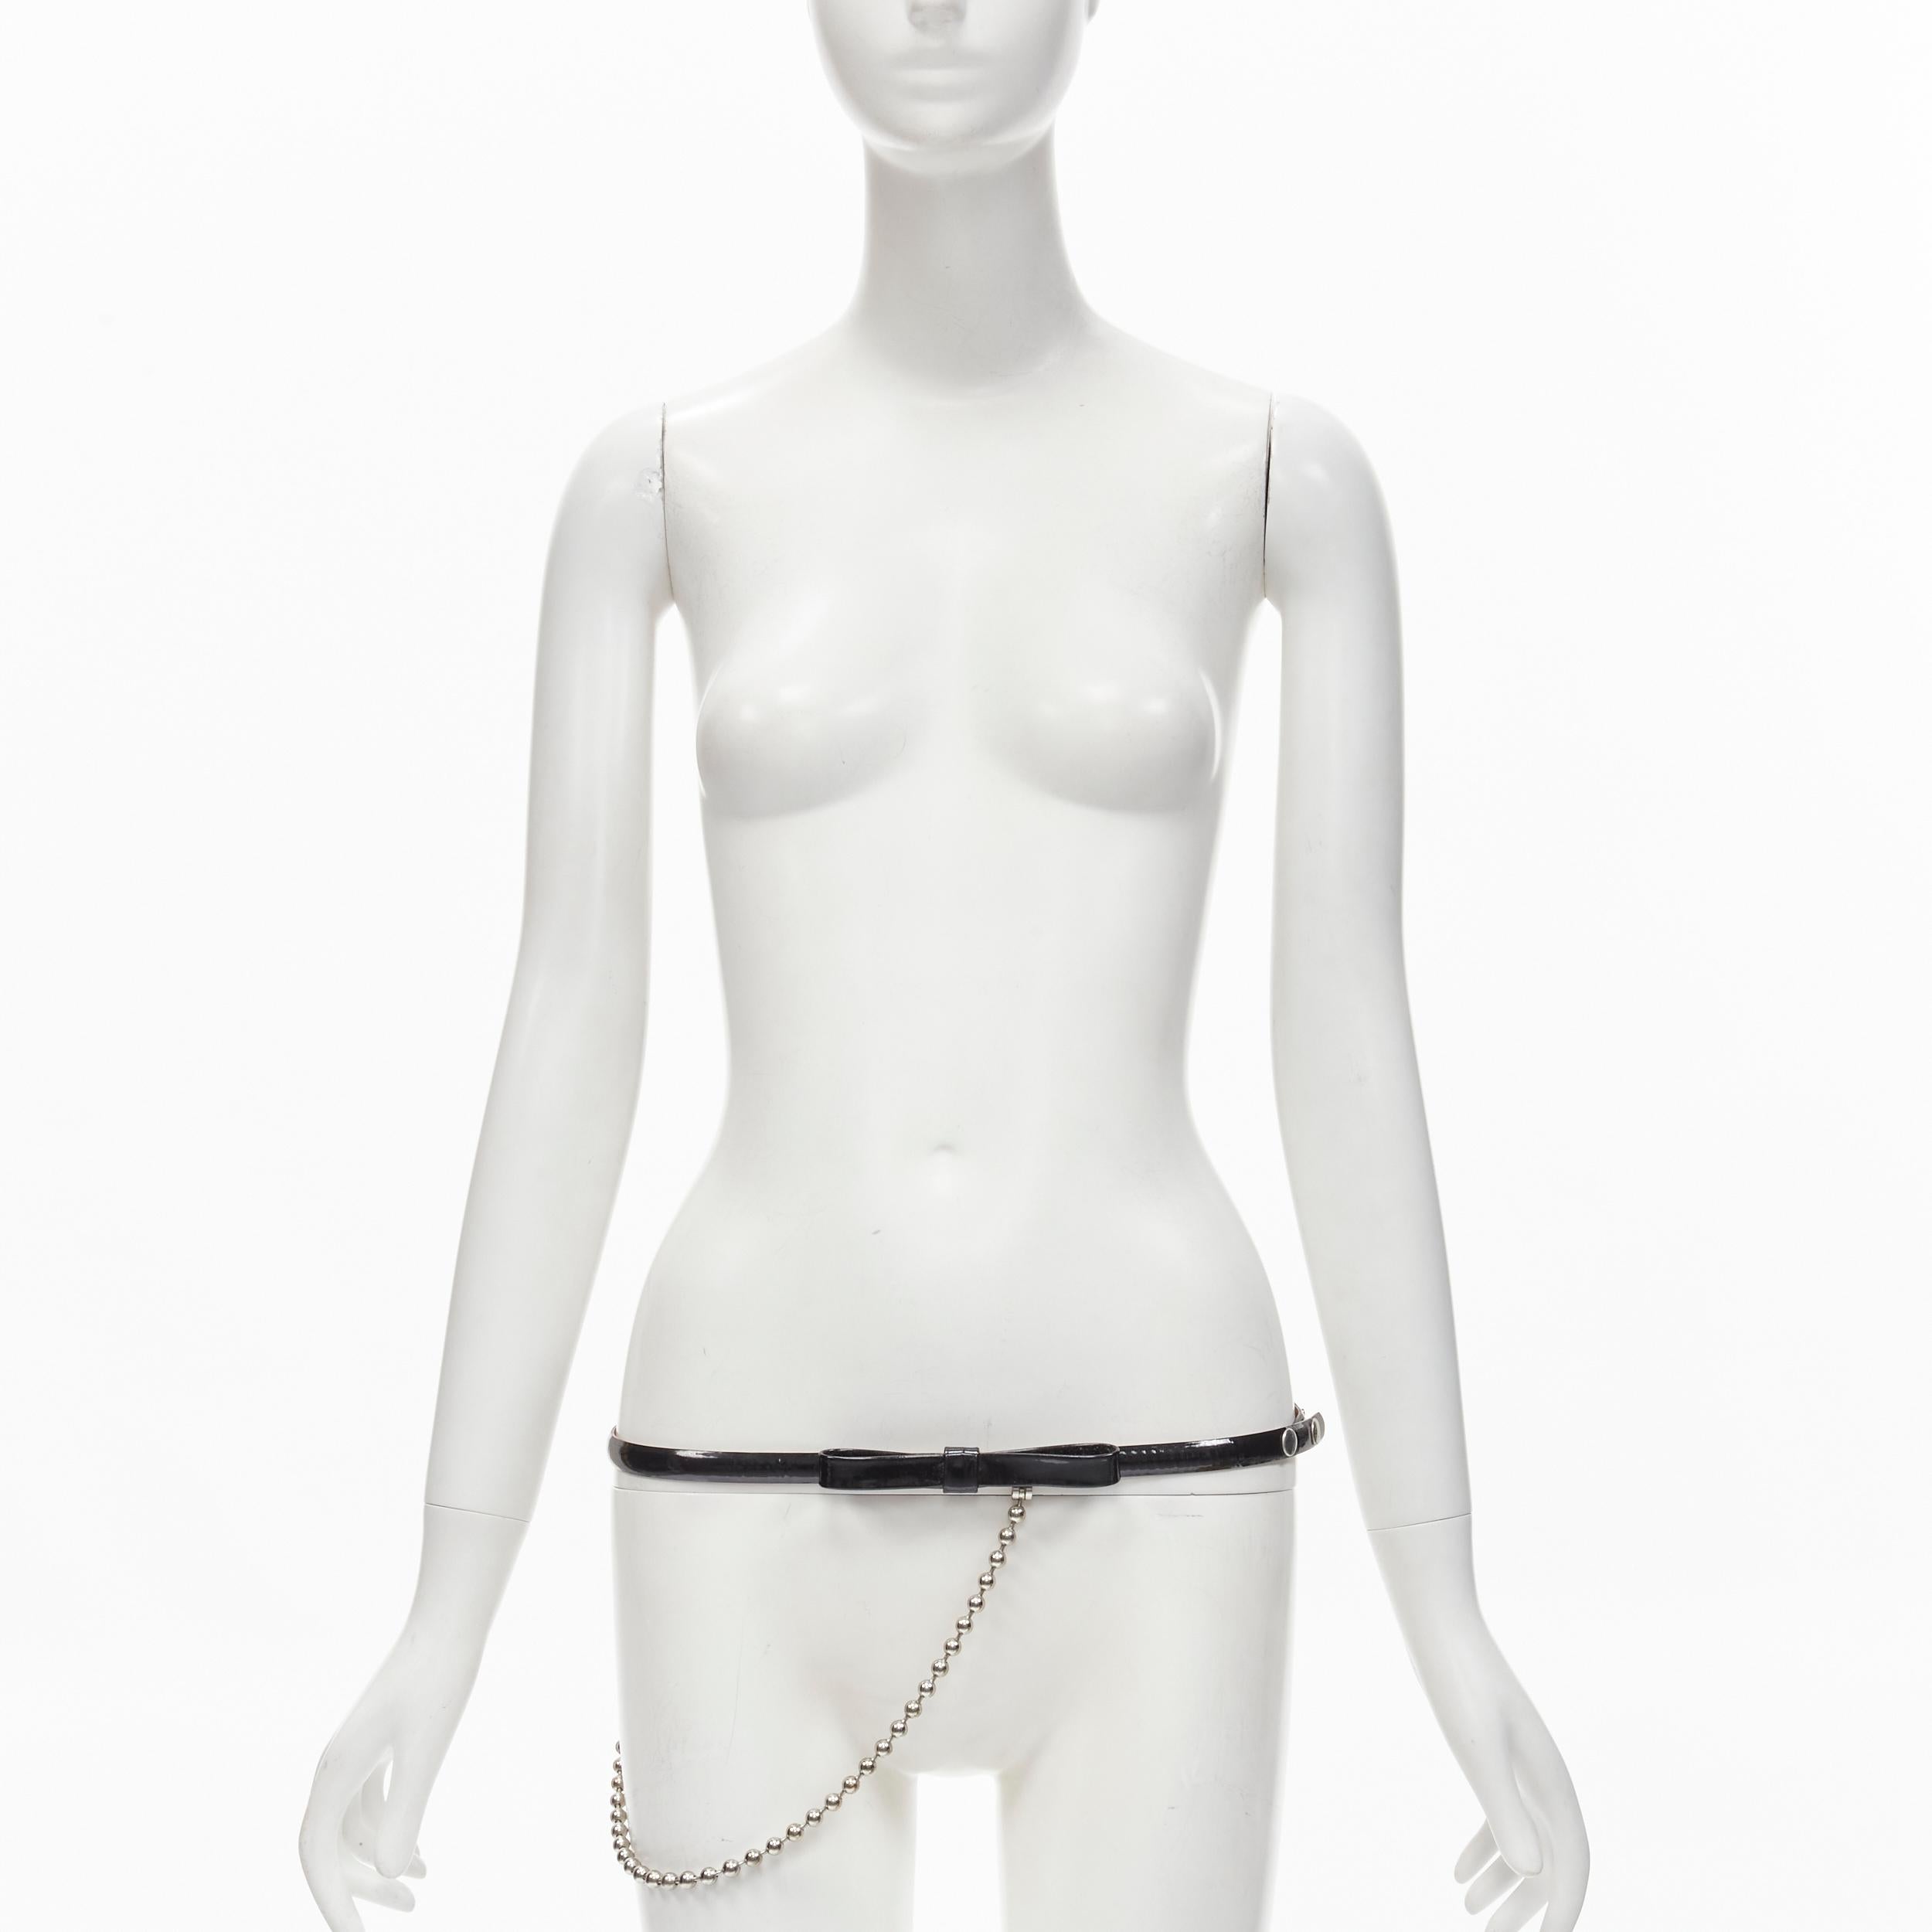 DSQUARED2 Vintage black patent leather bow silver ball chain belt S
Brand: Dsquared2
Material: Patent Leather
Color: Black
Pattern: Solid
Closure: Snap Buttons
Extra Detail: Attached ball chain
Made in: Italy

CONDITION:
Condition: Very good, this